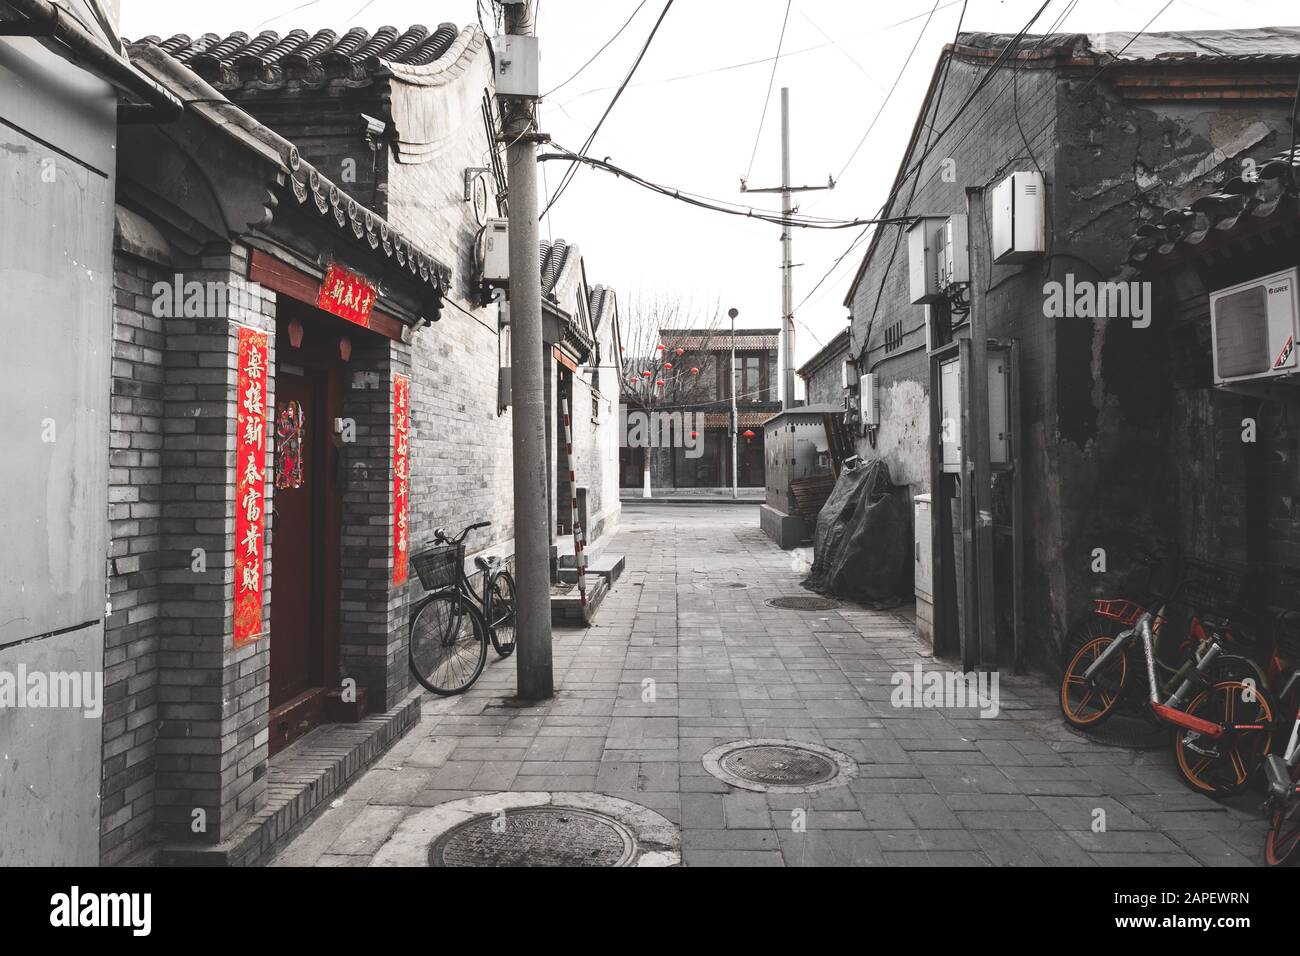 Decorated street / hutong / small alley in Beijing during the Chinese New Year, also referred to as the spring festival. With bicycles, old buildings Stock Photo